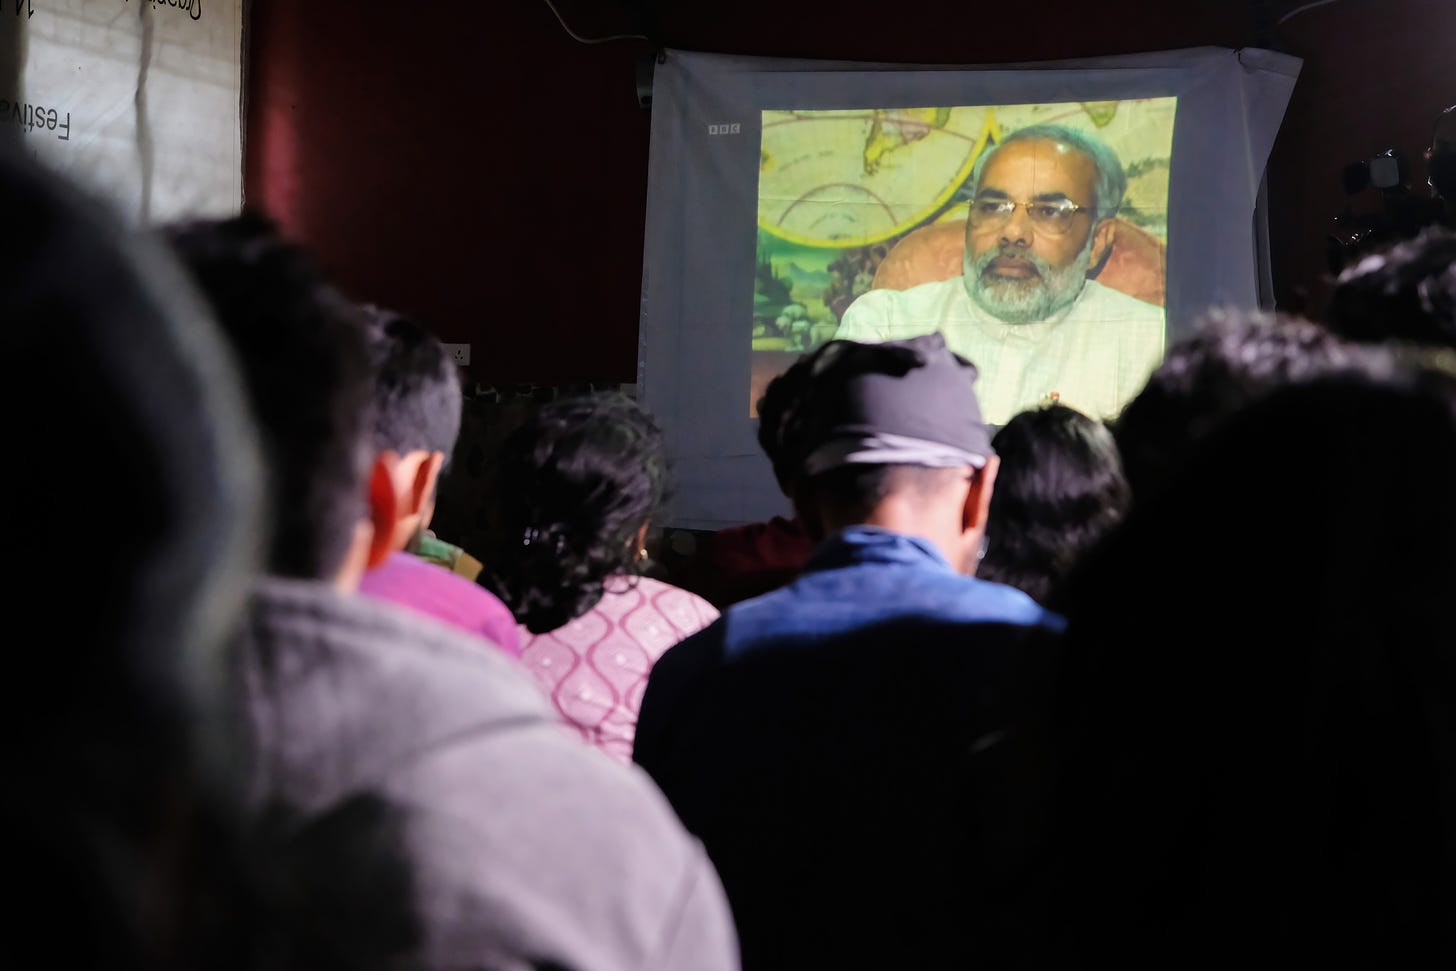 Students of Presidency University arranged a showing of the banned BBC Documentary about prime minister Narendra Modi. (Photo by Dipayan Bose/SOPA Images/LightRocket via Getty Images).